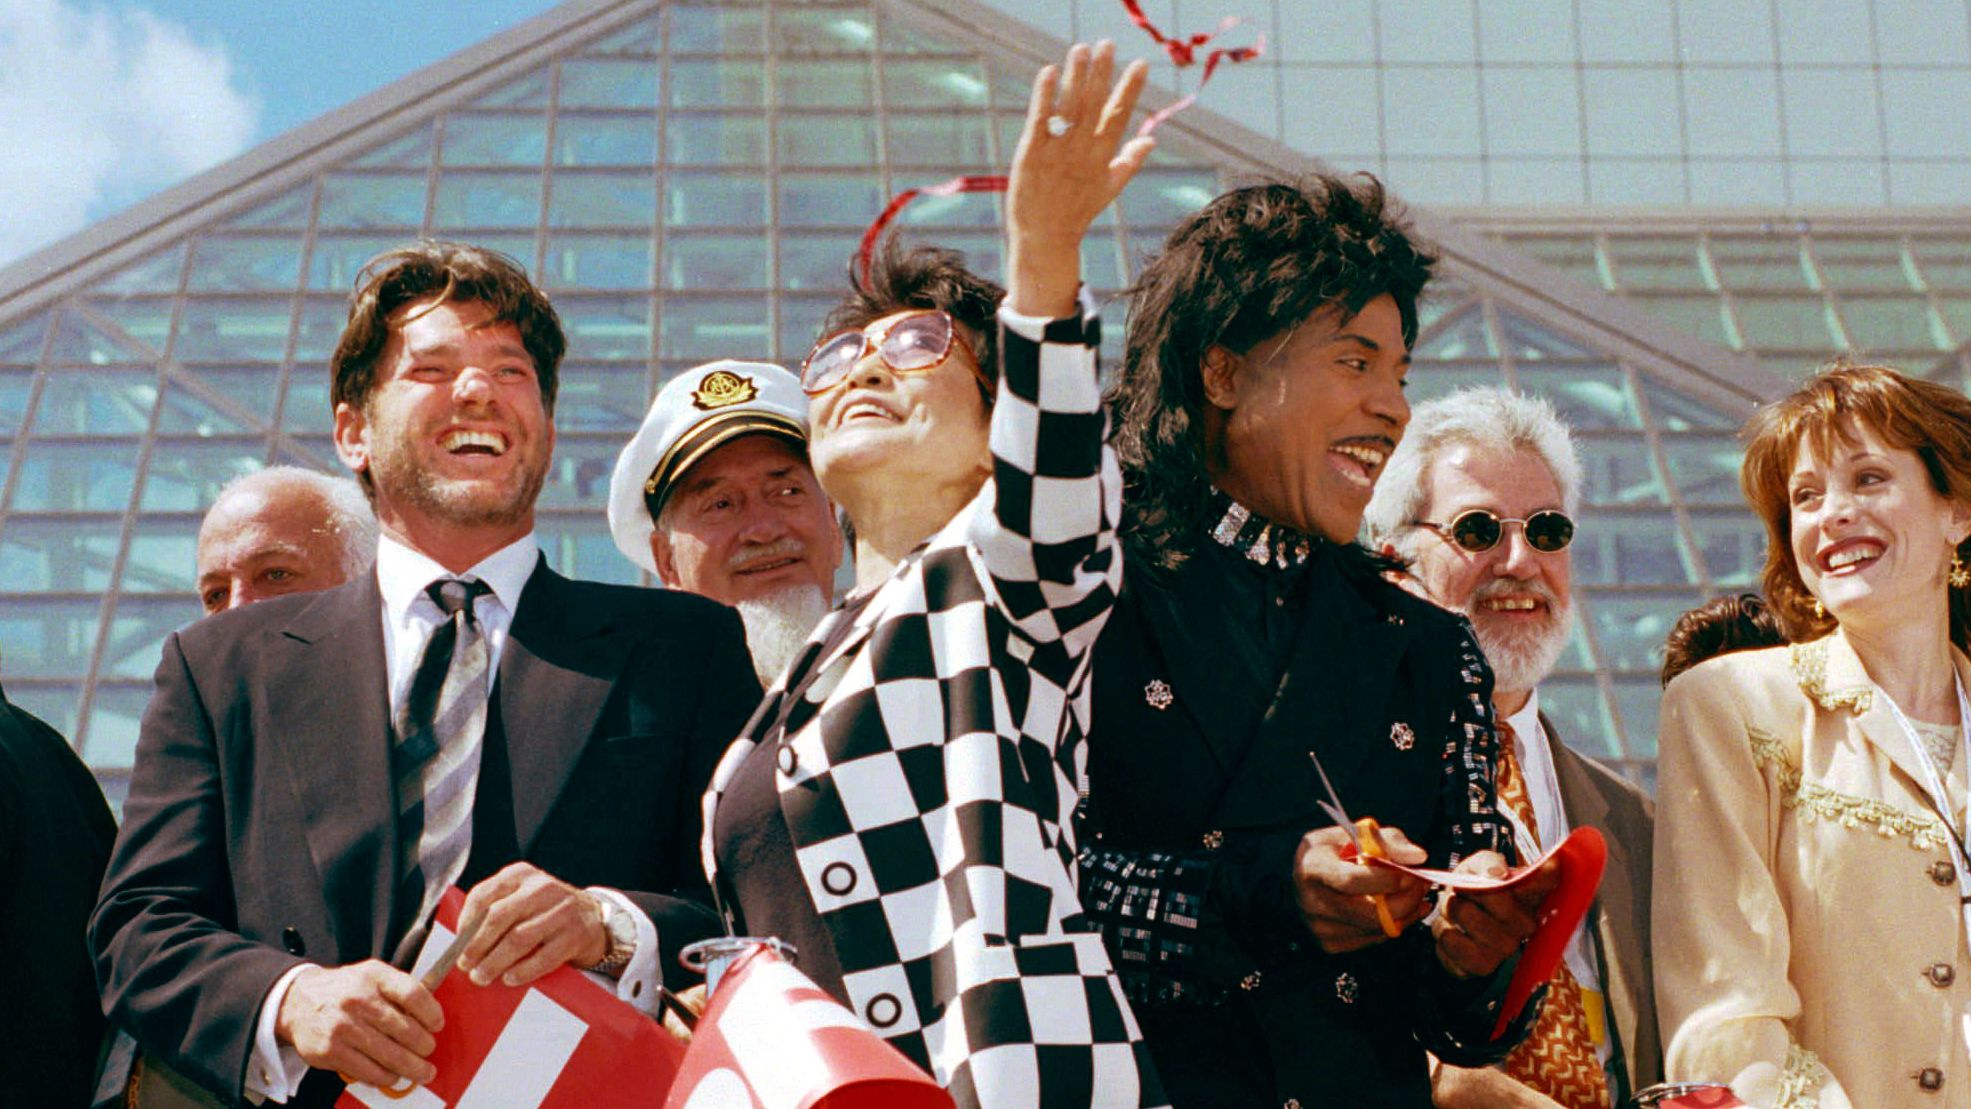 Rolling Stone publisher Jann Wenner, left, Yoko Ono, center, and Little Richard celebrate after cutting the ribbon to open the Rock and Roll Hall of Fame and museum in Cleveland in 1995.